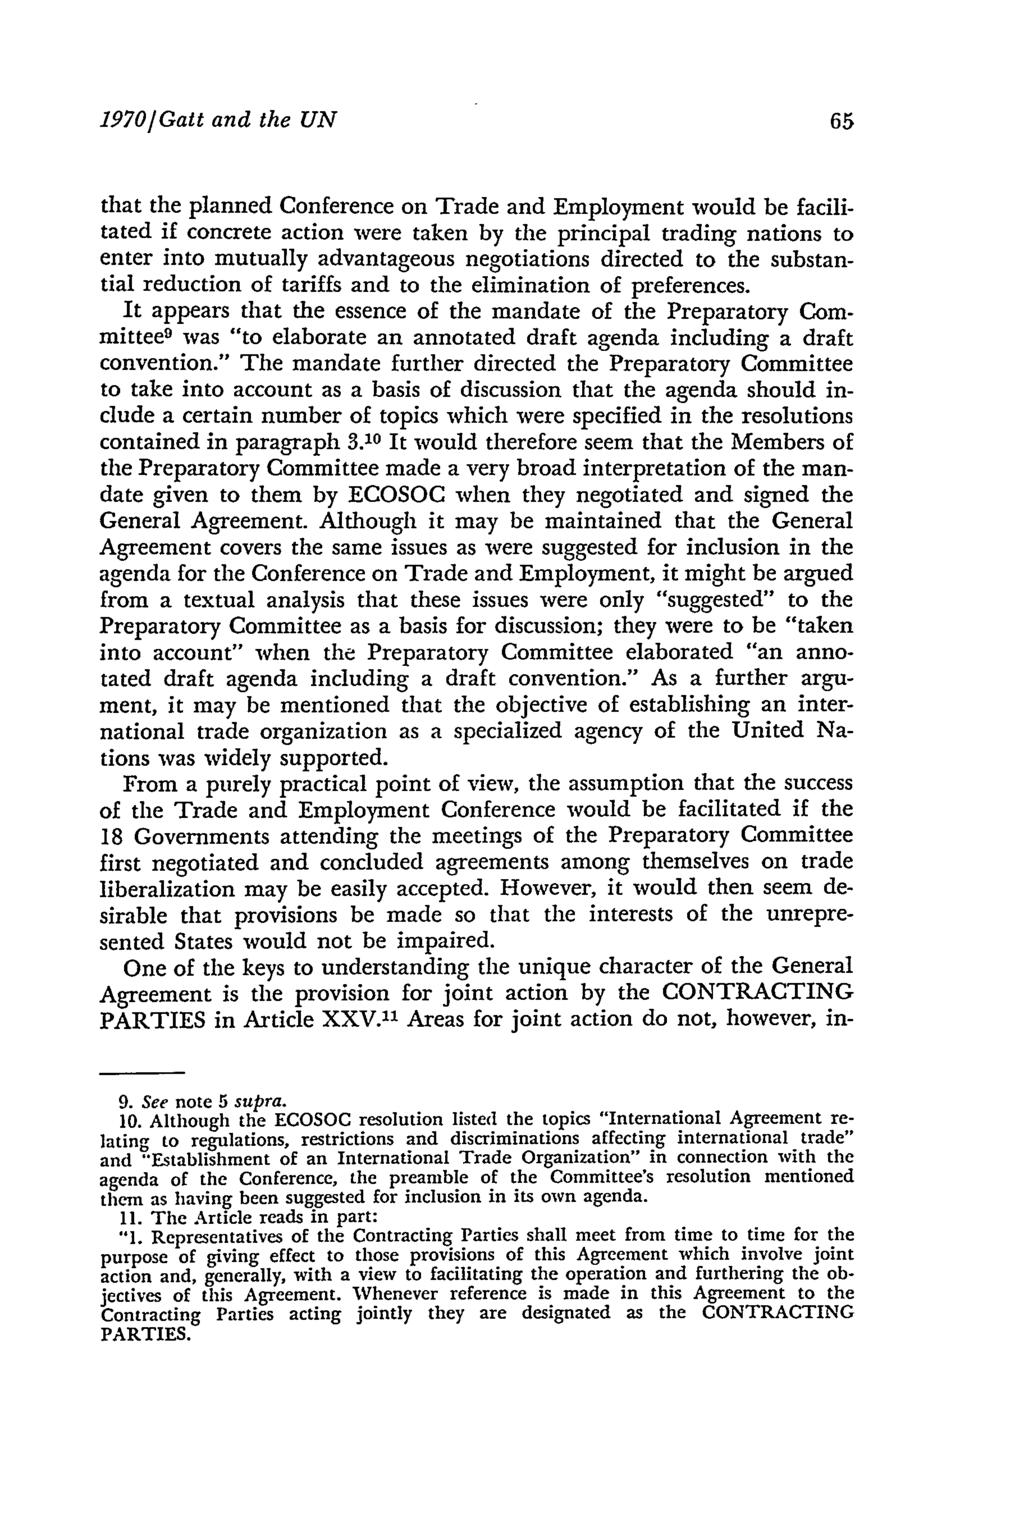 1970]Gatt and the UN that the planned Conference on Trade and Employment would be facilitated if concrete action were taken by the principal trading nations to enter into mutually advantageous